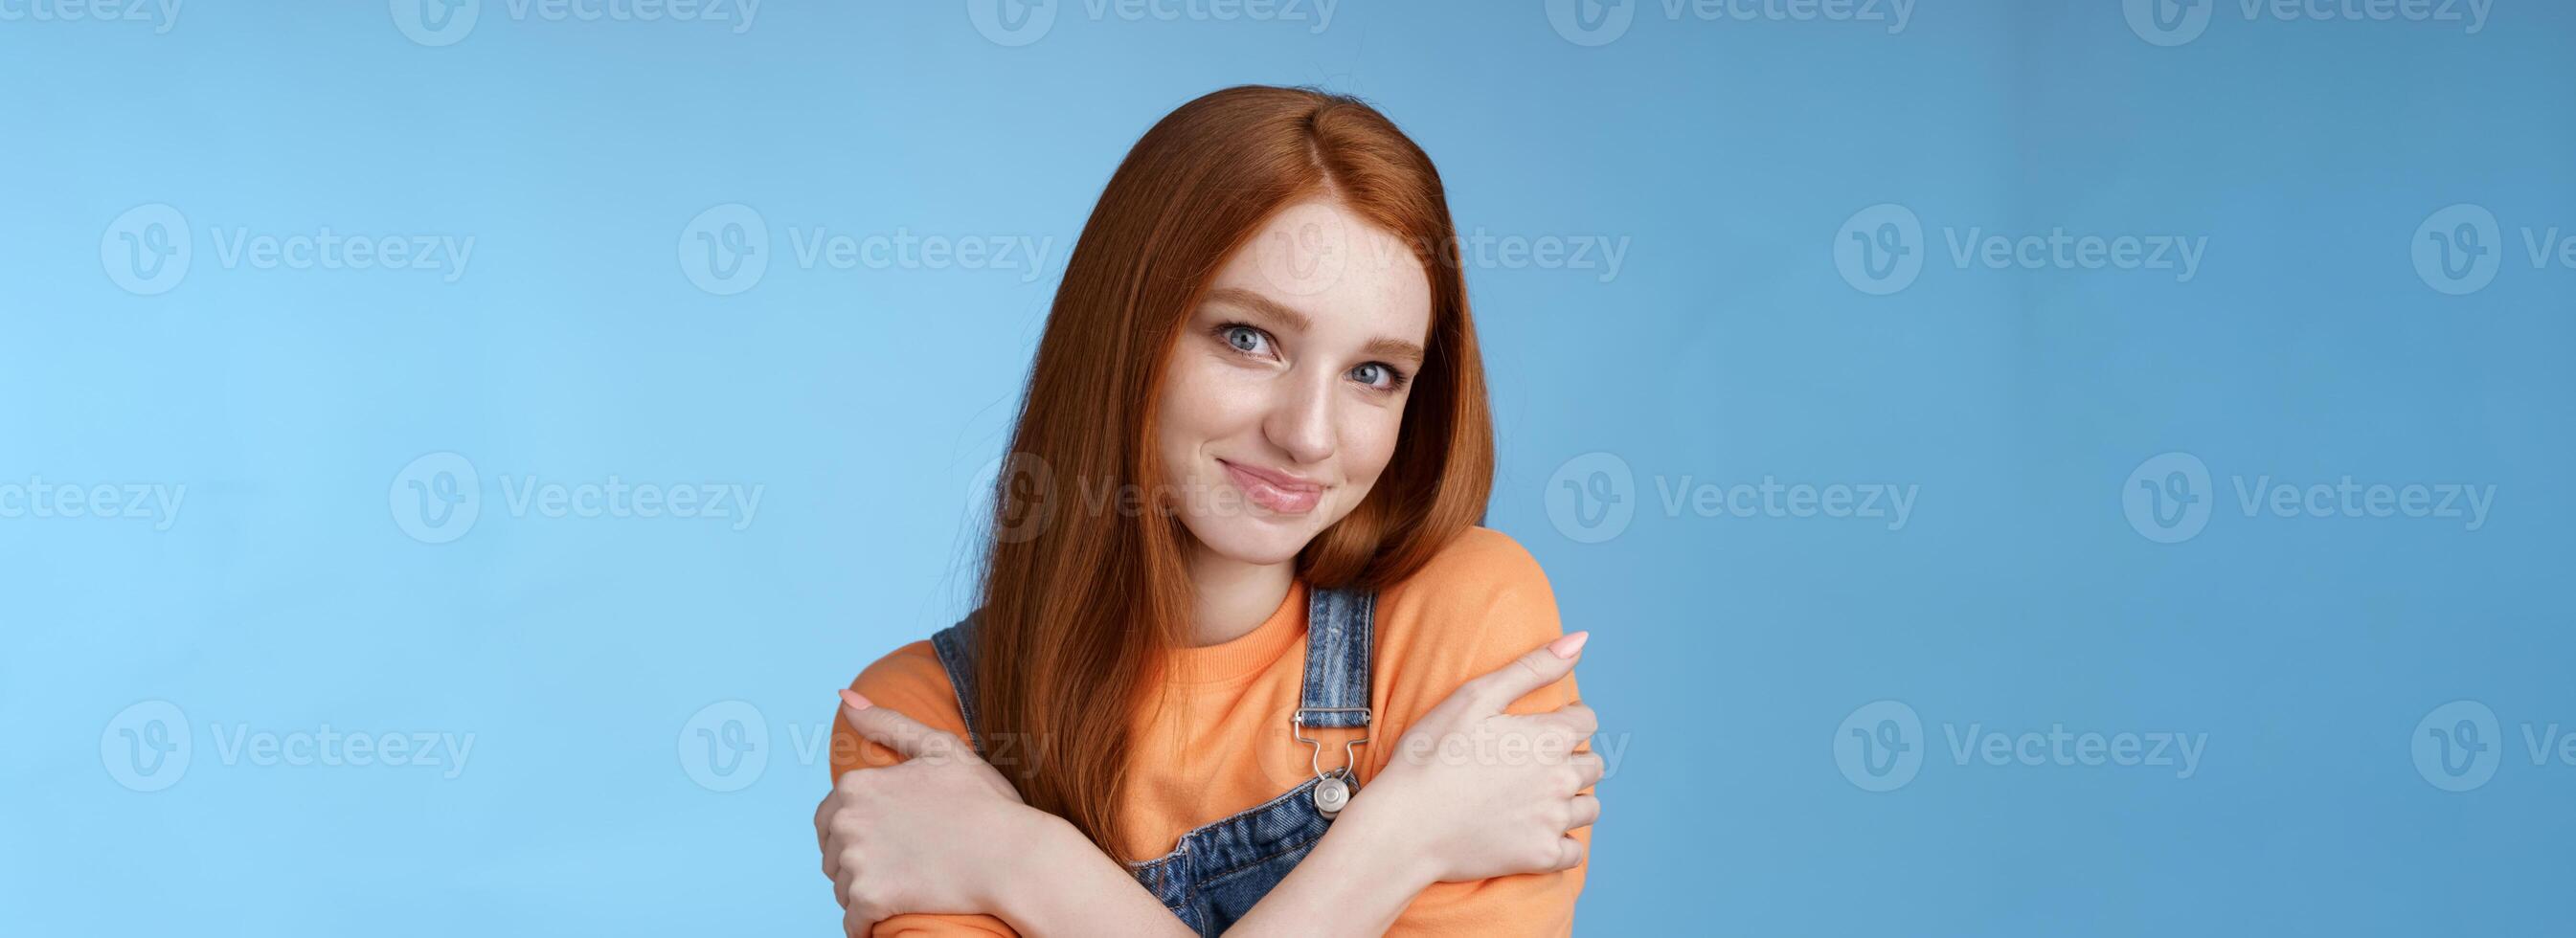 Romantic sensitive flirty young redhead girlfriend feel warmth embraces hugging herself hands crossed body tilting head smiling safe gentle, dreaming lovely date recalling sensual moments photo